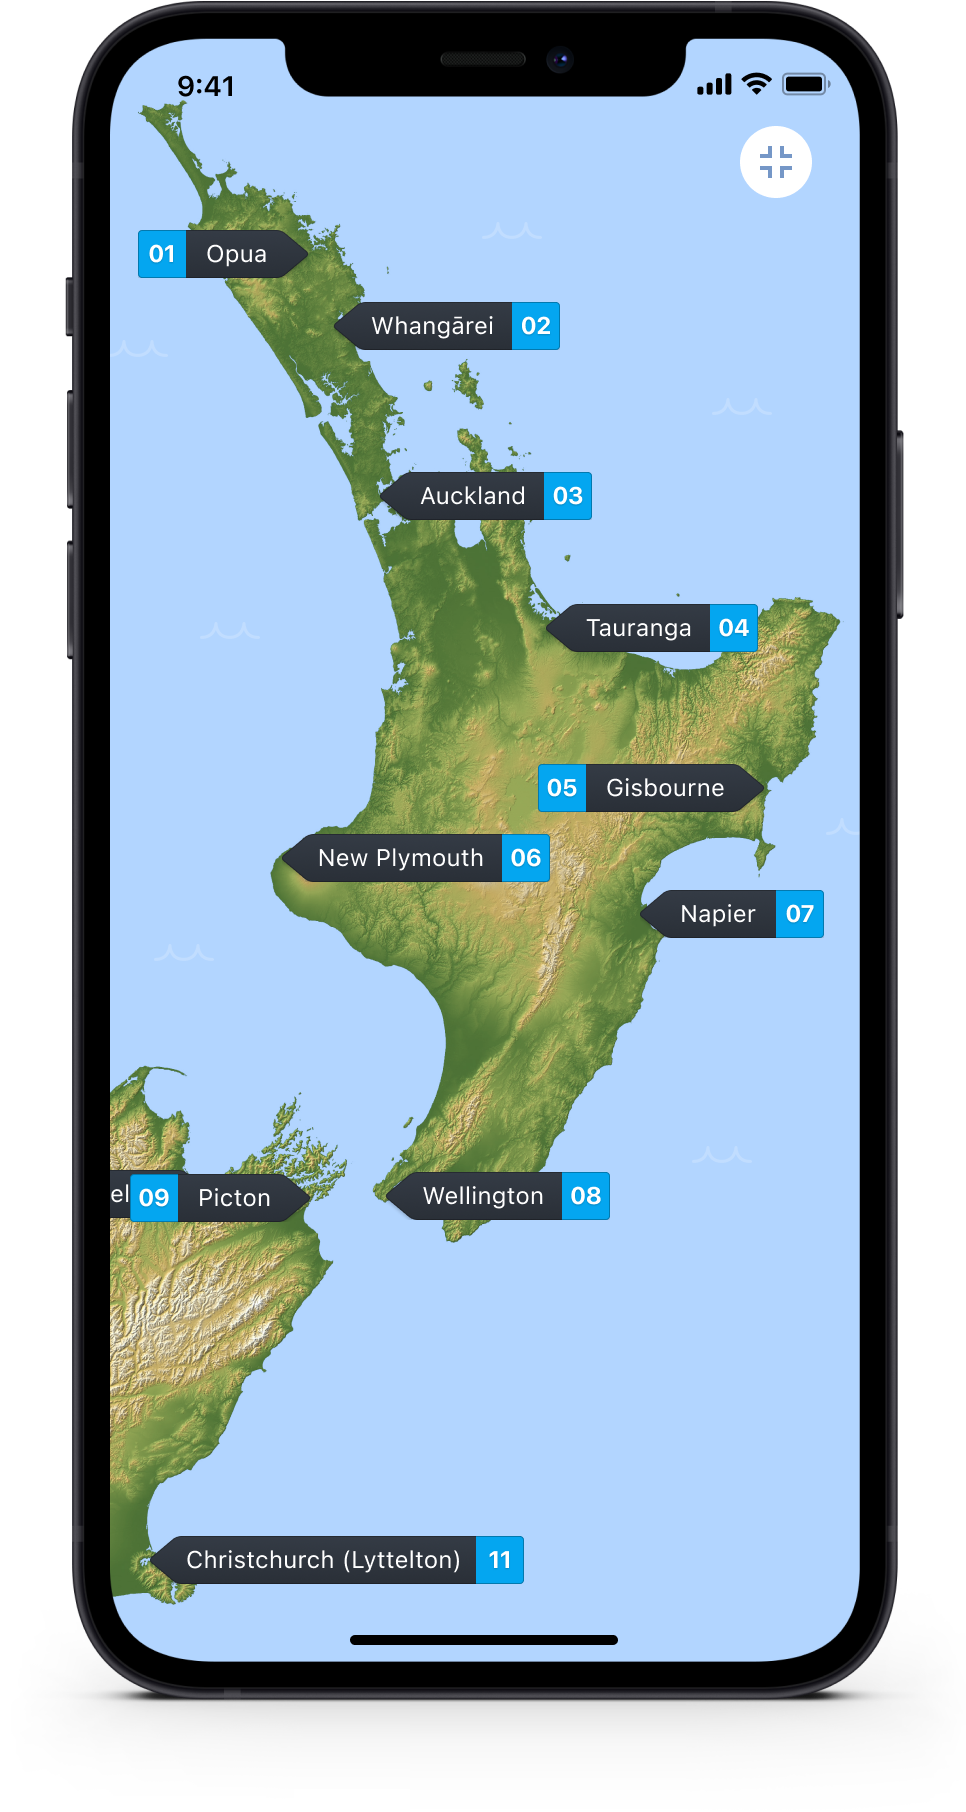 Coming to New Zealand locations most popular ports full screen